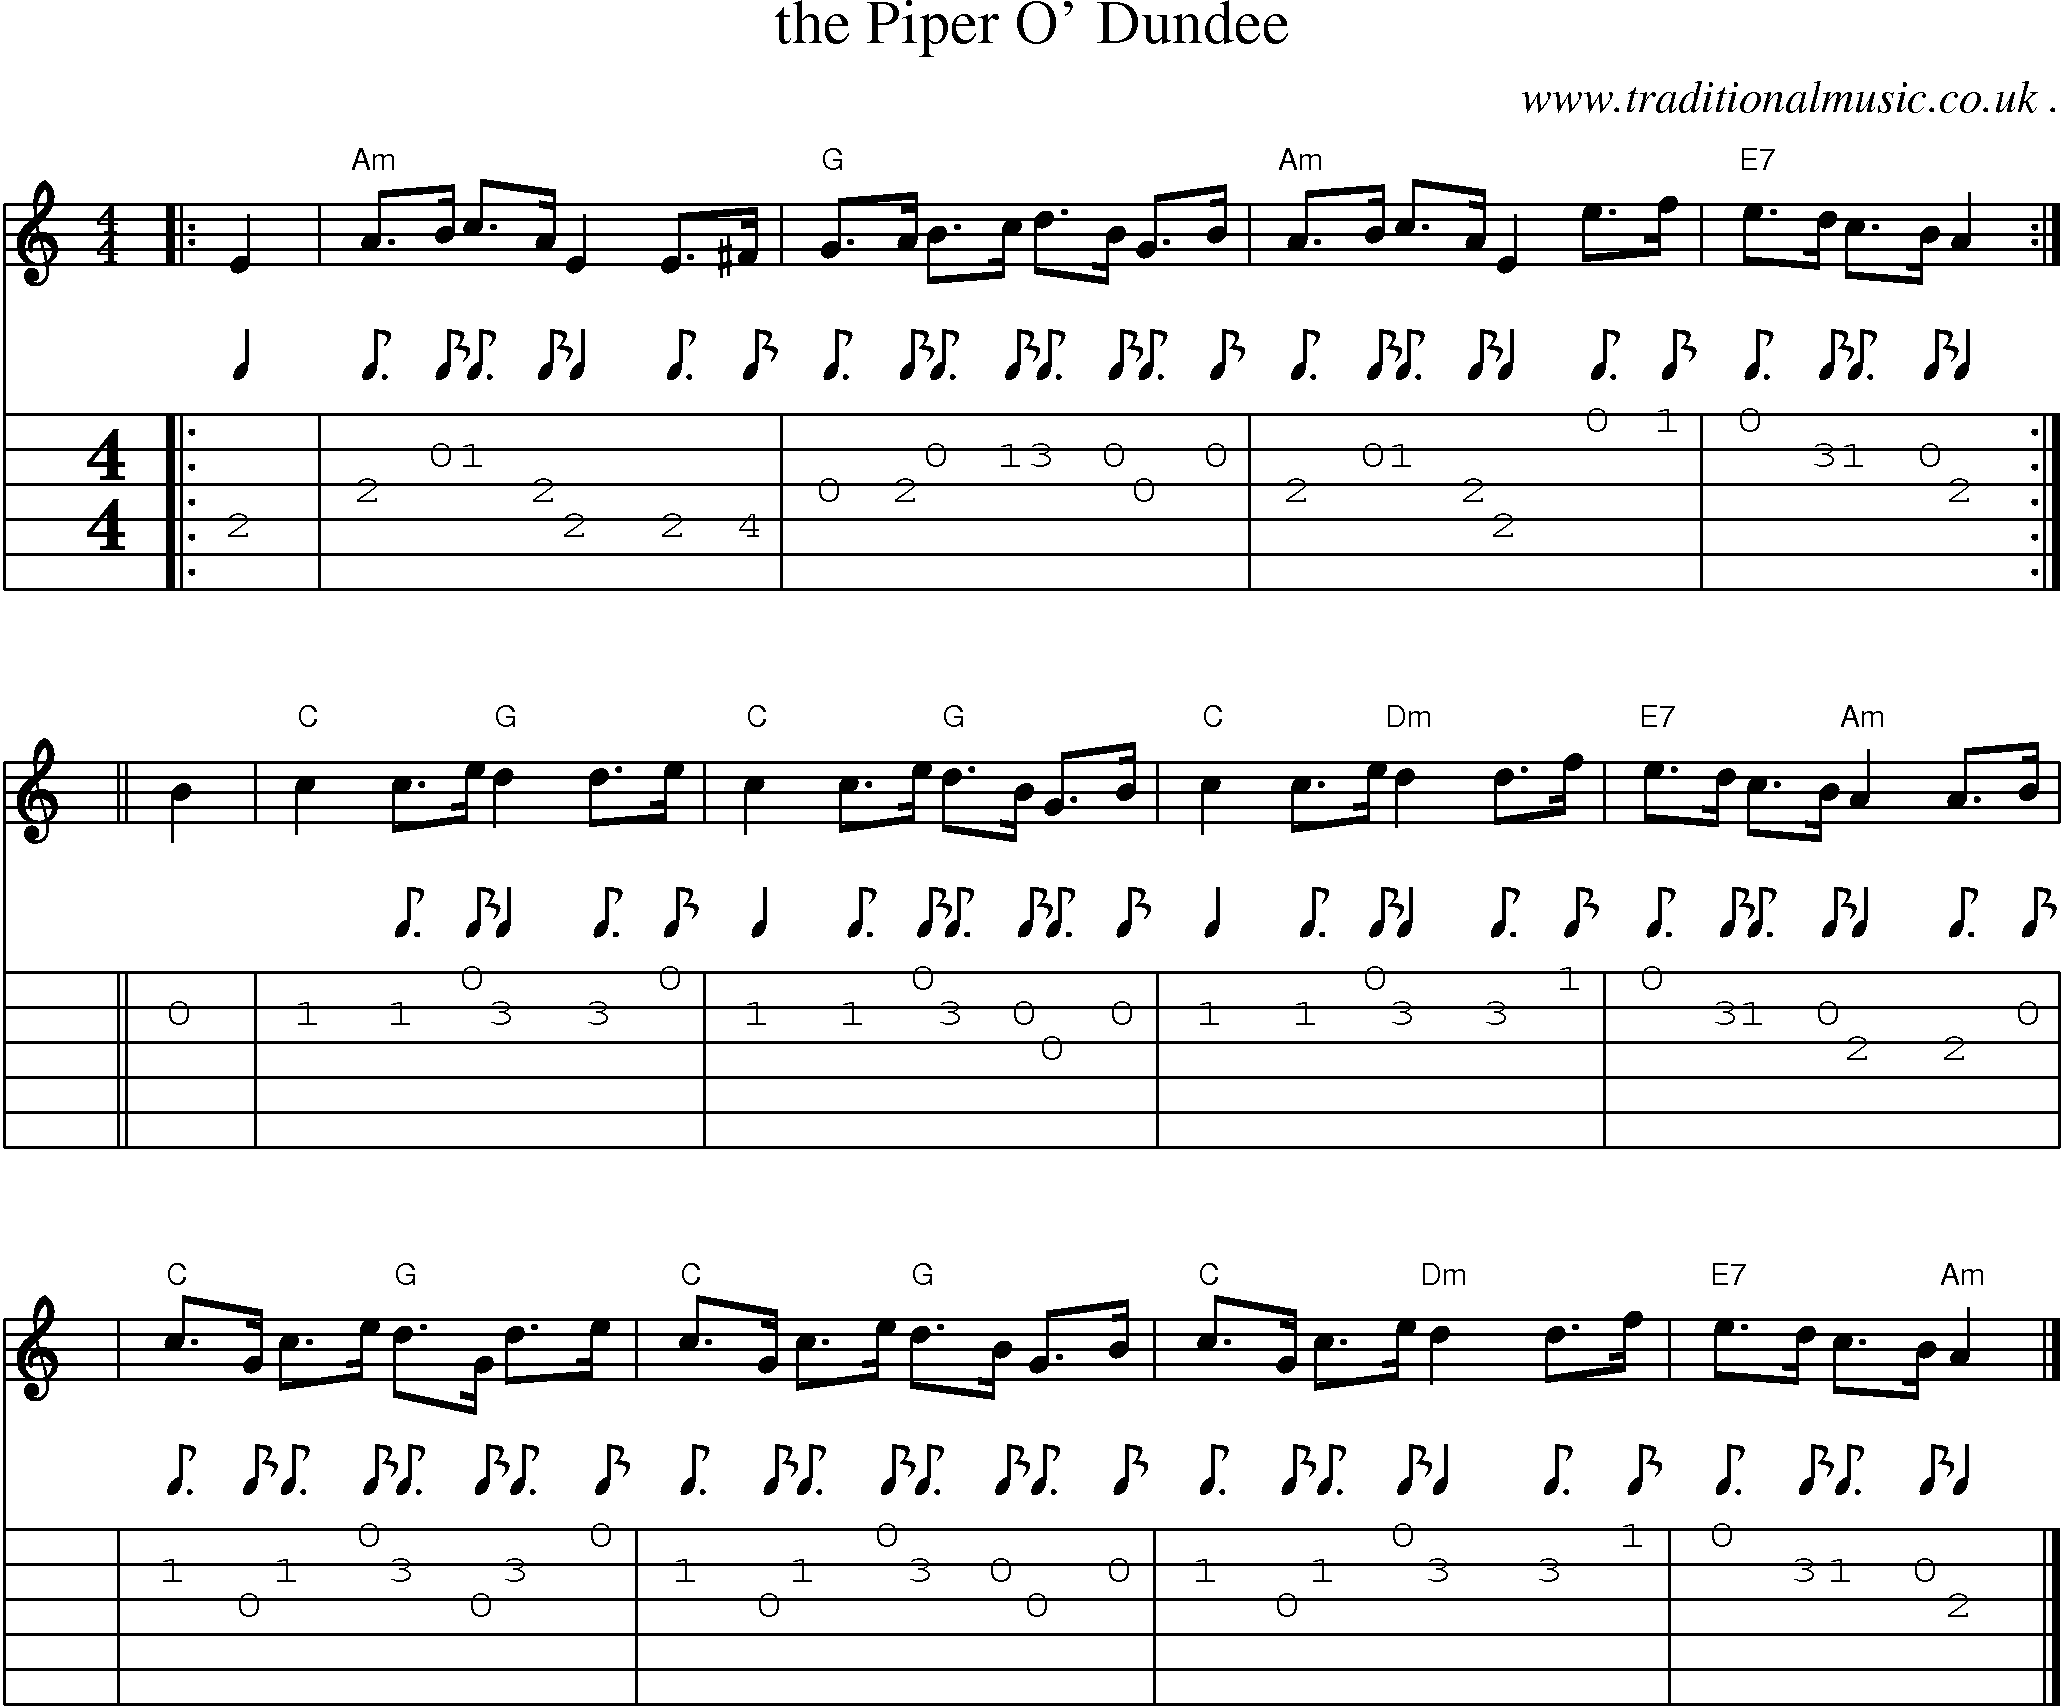 Sheet-music  score, Chords and Guitar Tabs for The Piper O Dundee